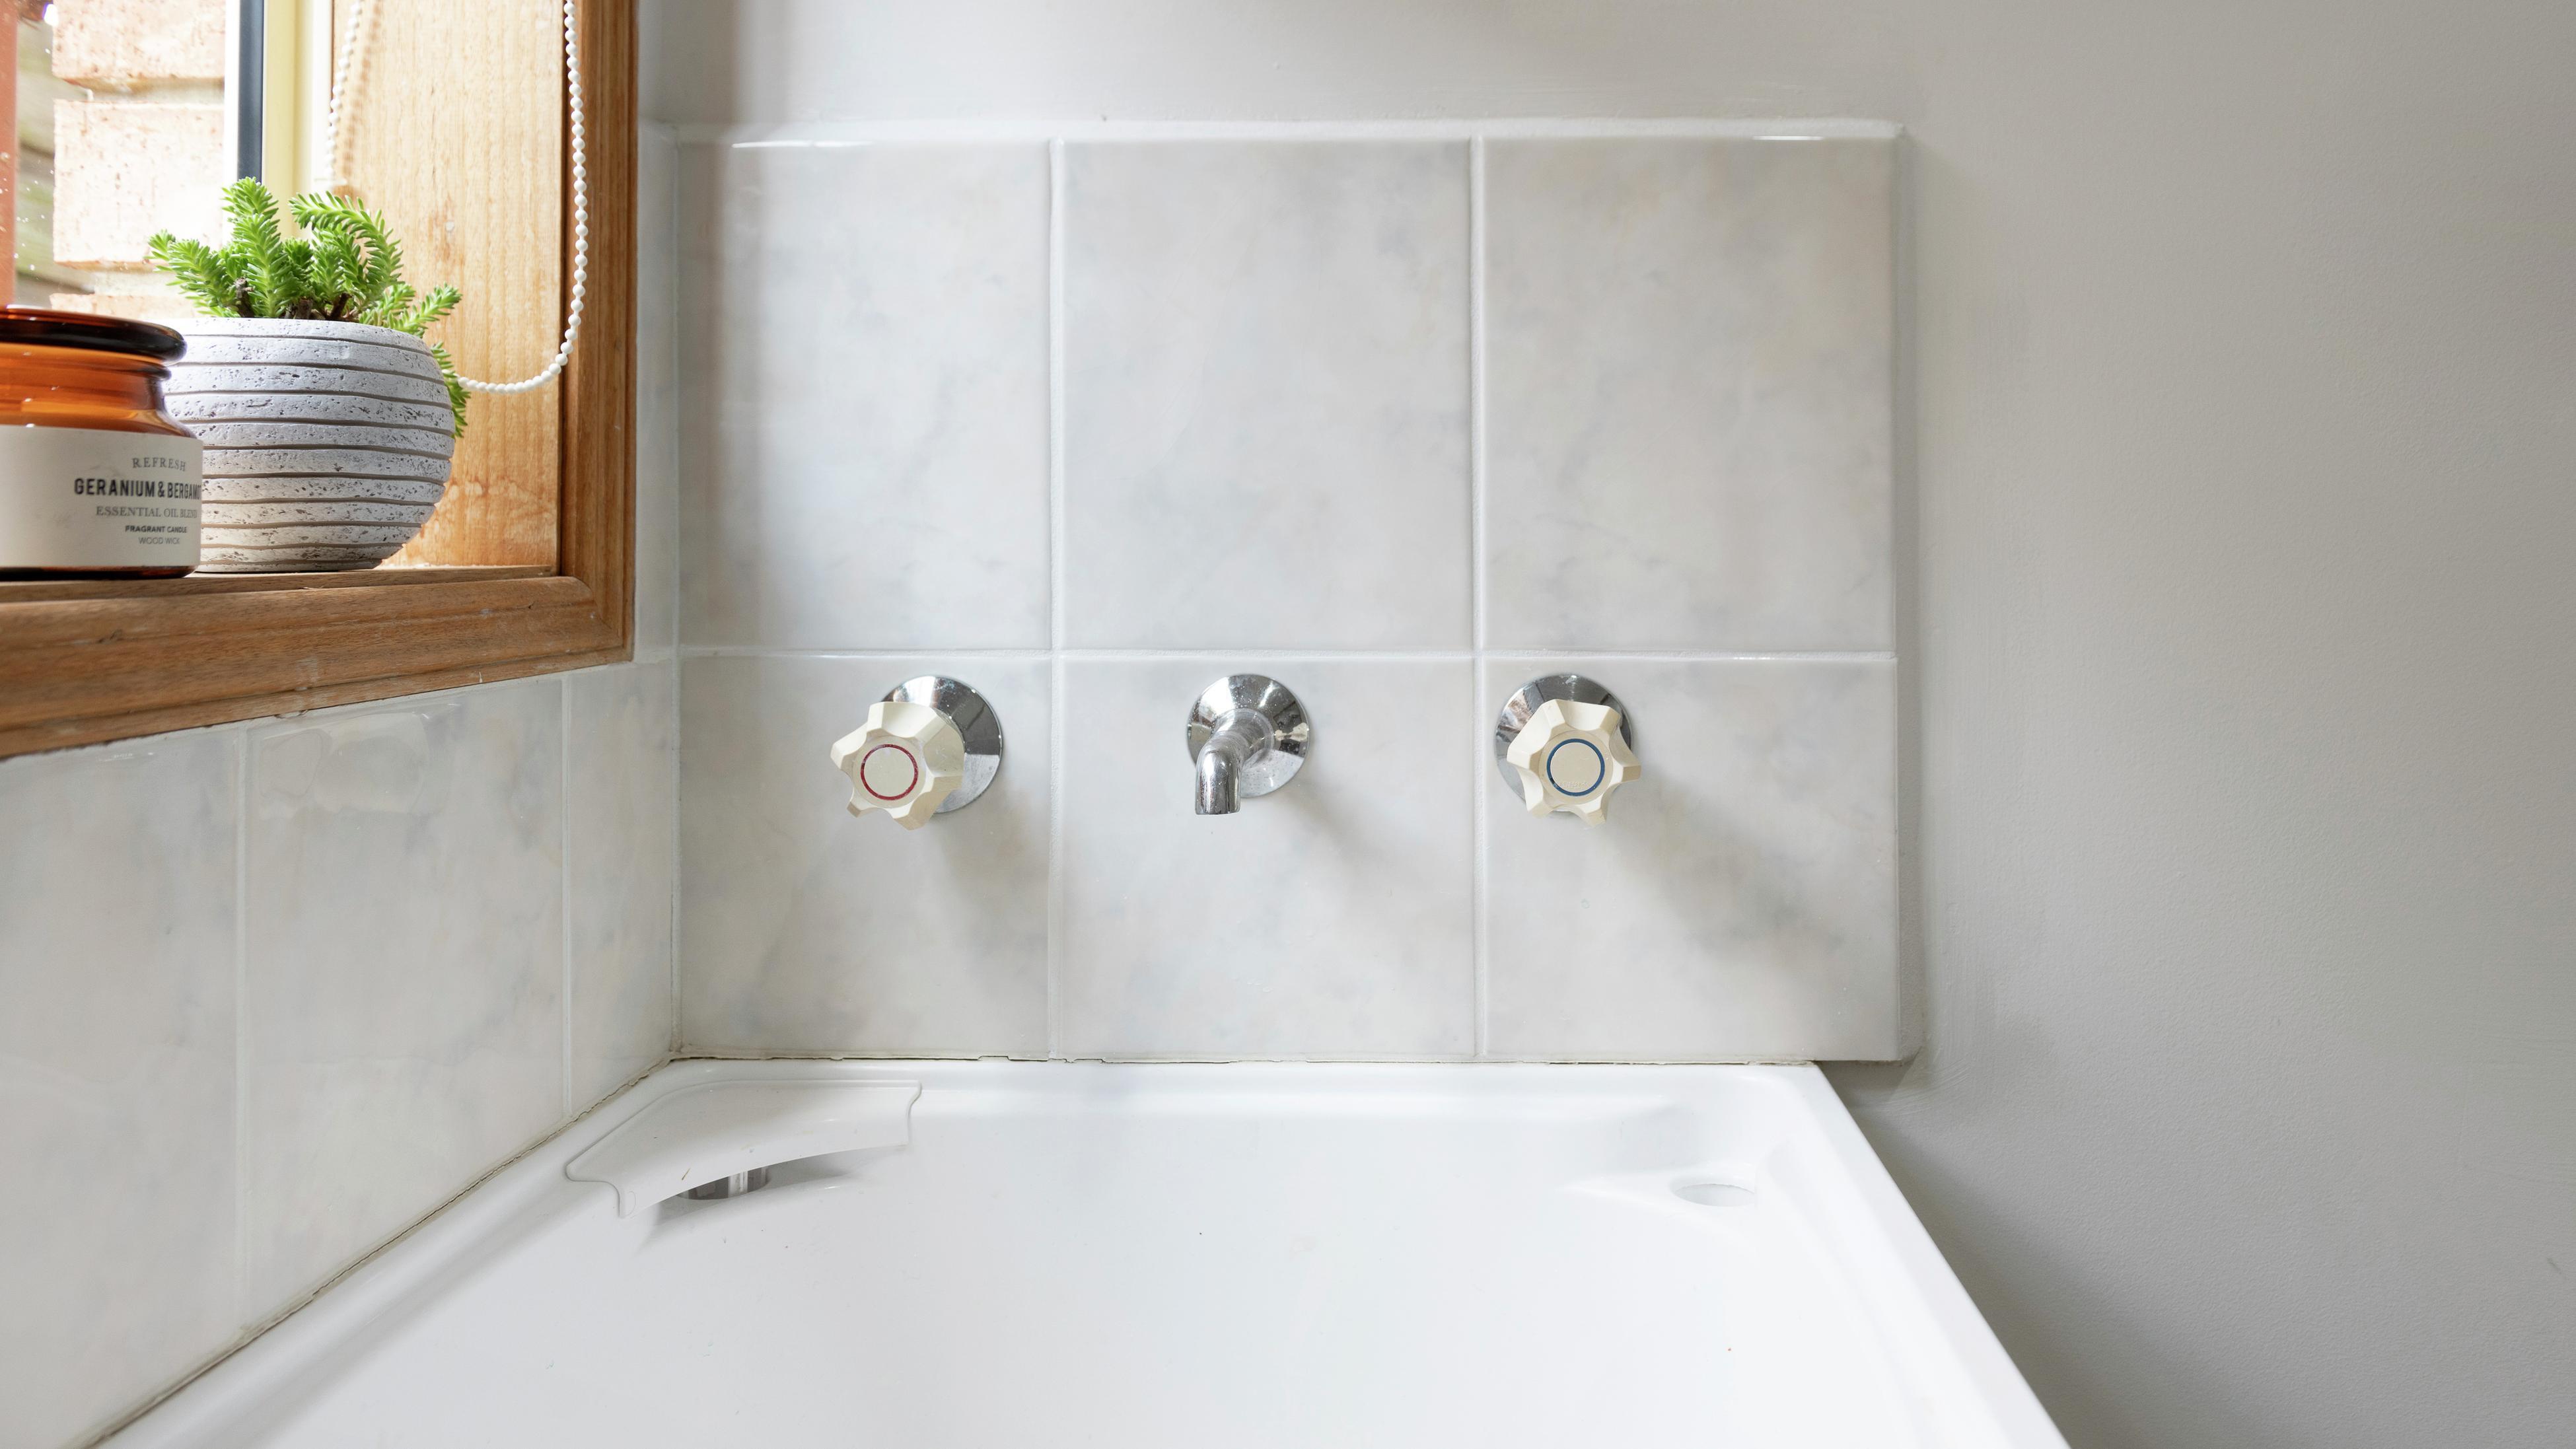 Mr. Fix It with tips on cleaning bathroom tile and grout 